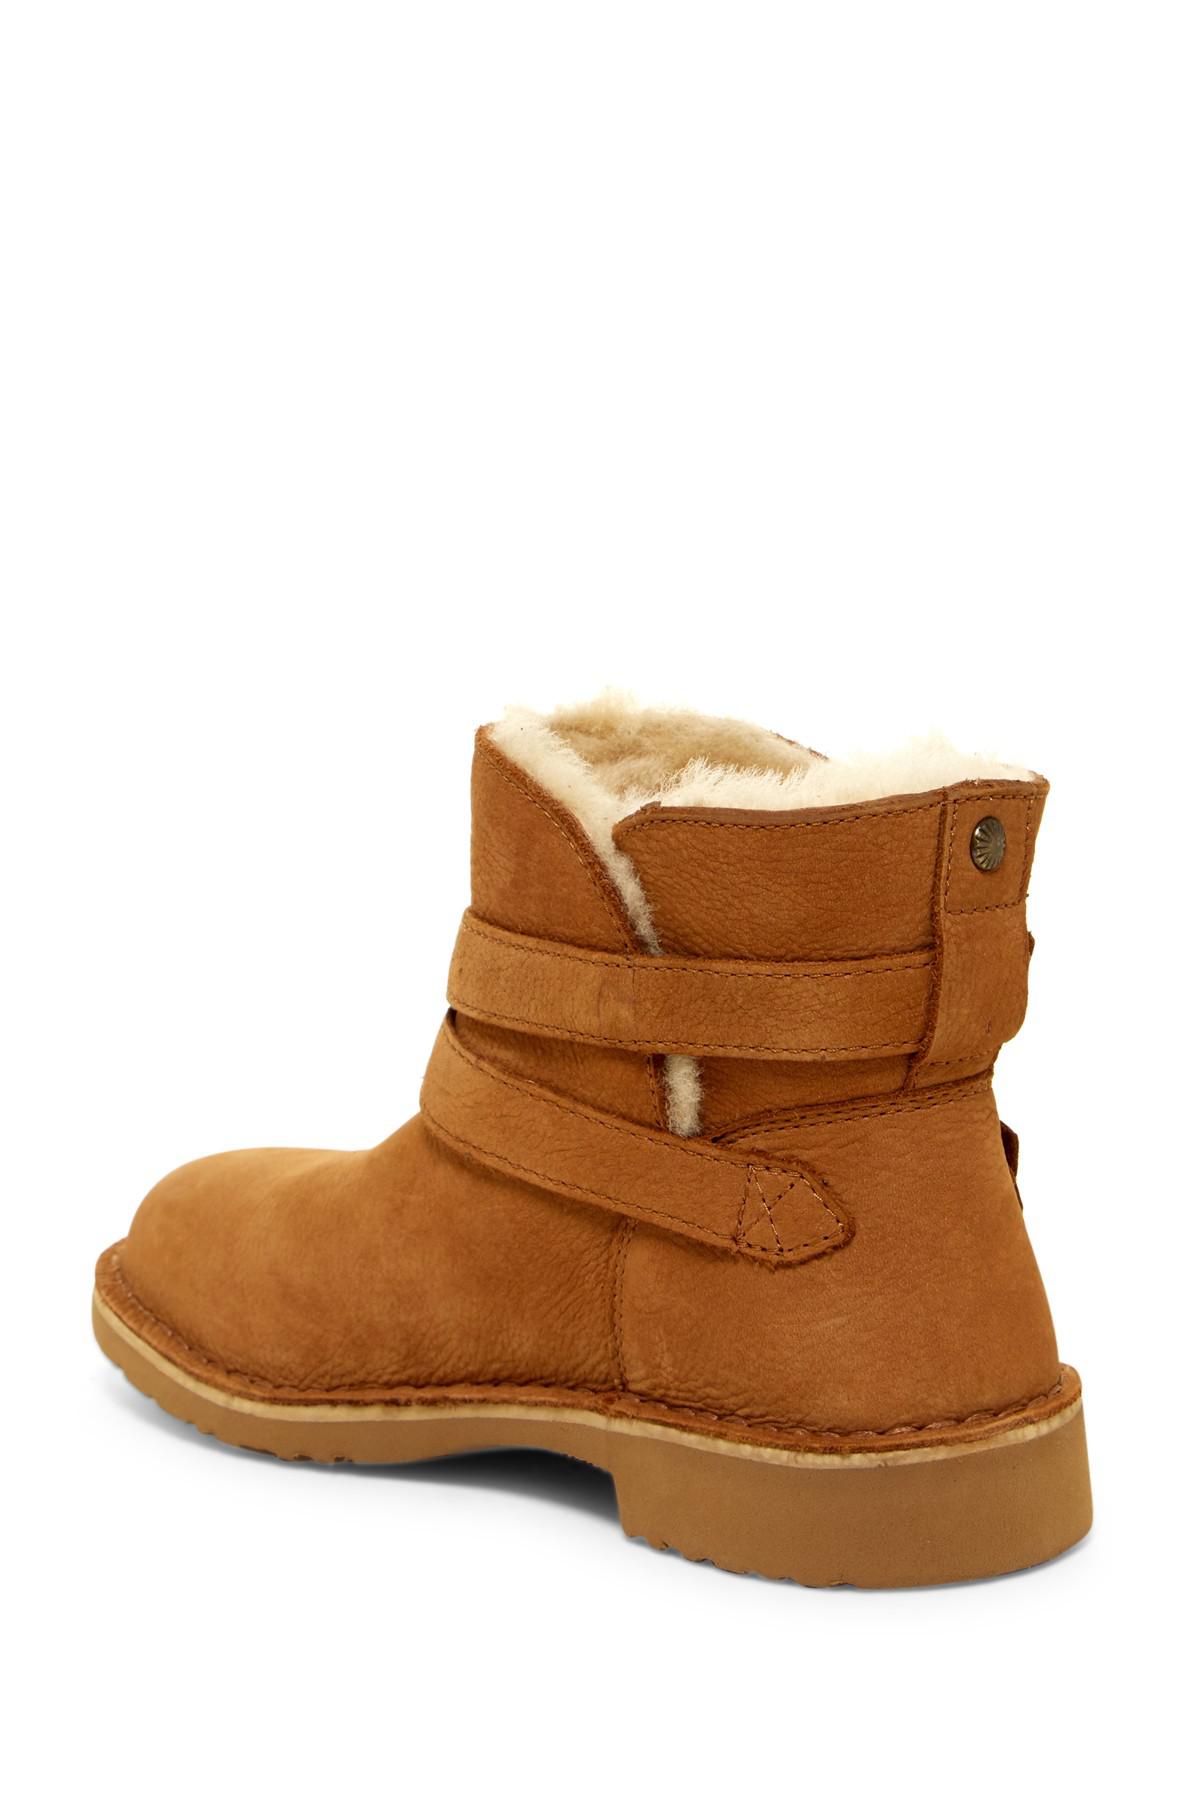 Lyst - Ugg Aliso Uggpure Boot in Brown